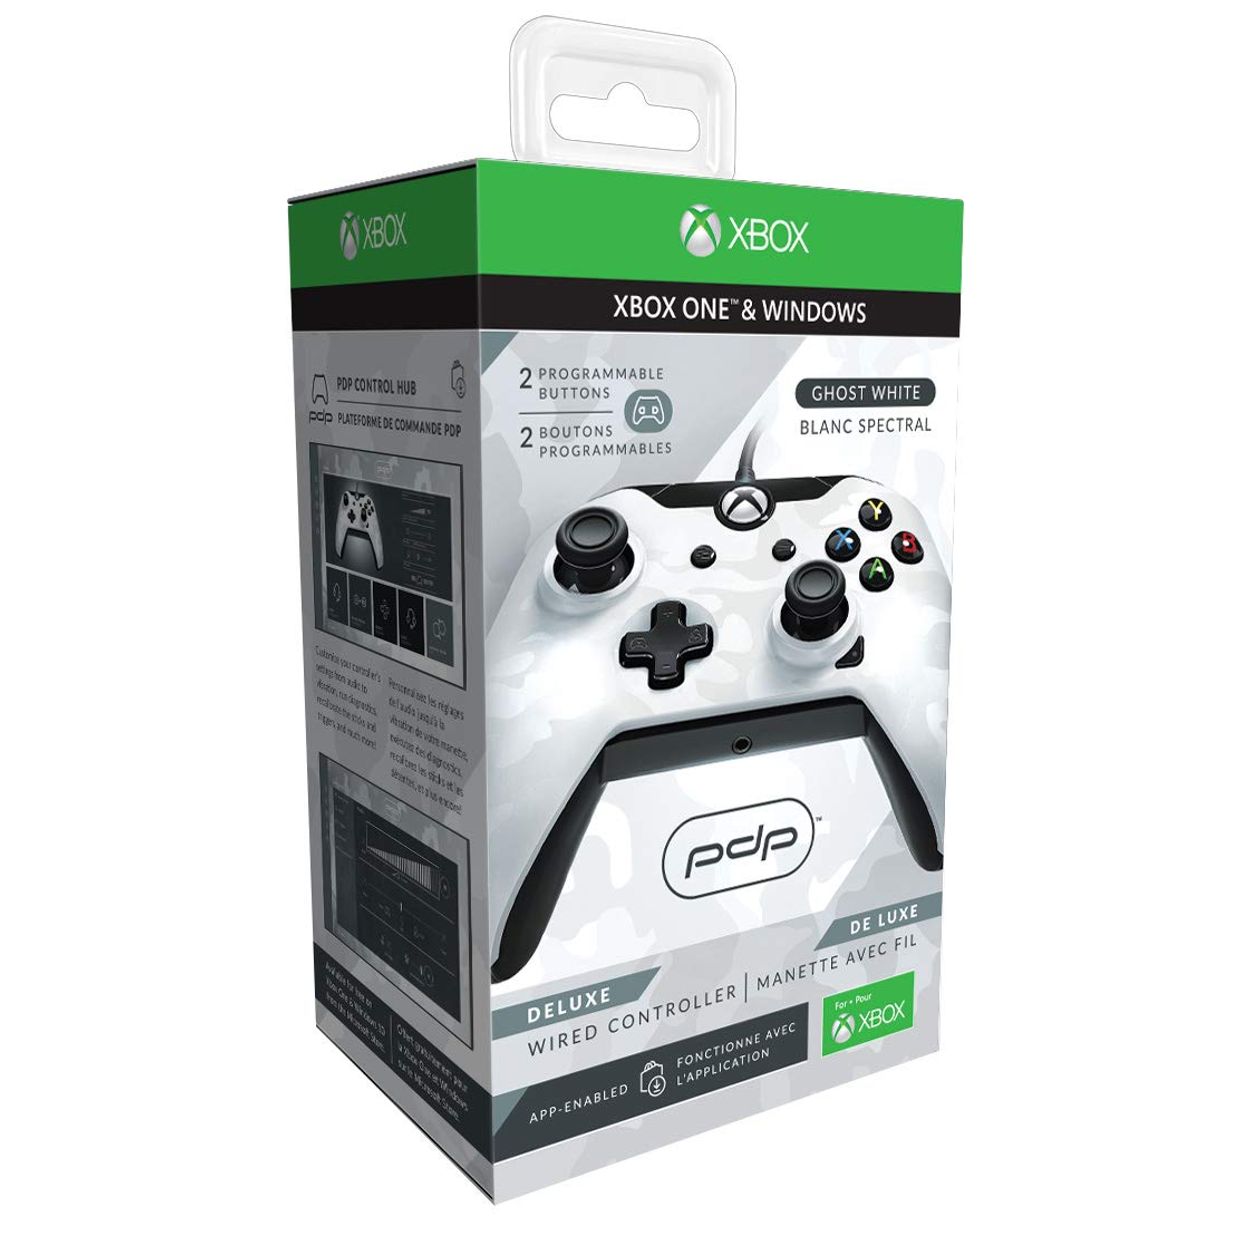 pdp wired controller for xbox one